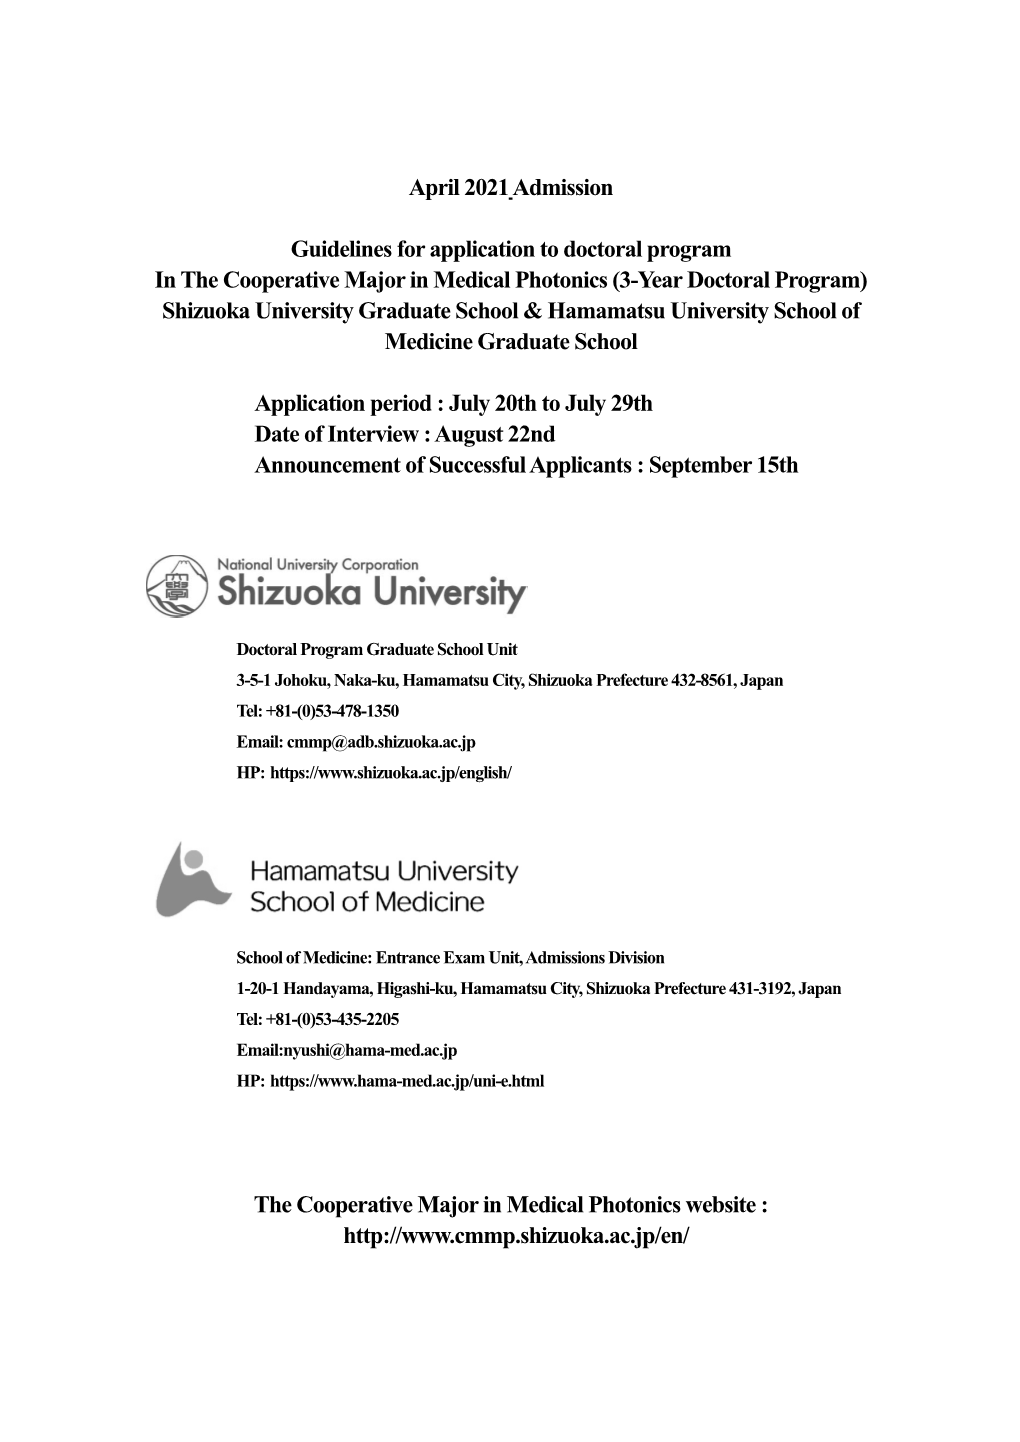 April 2021 Admission Guidelines for Application to Doctoral Program In